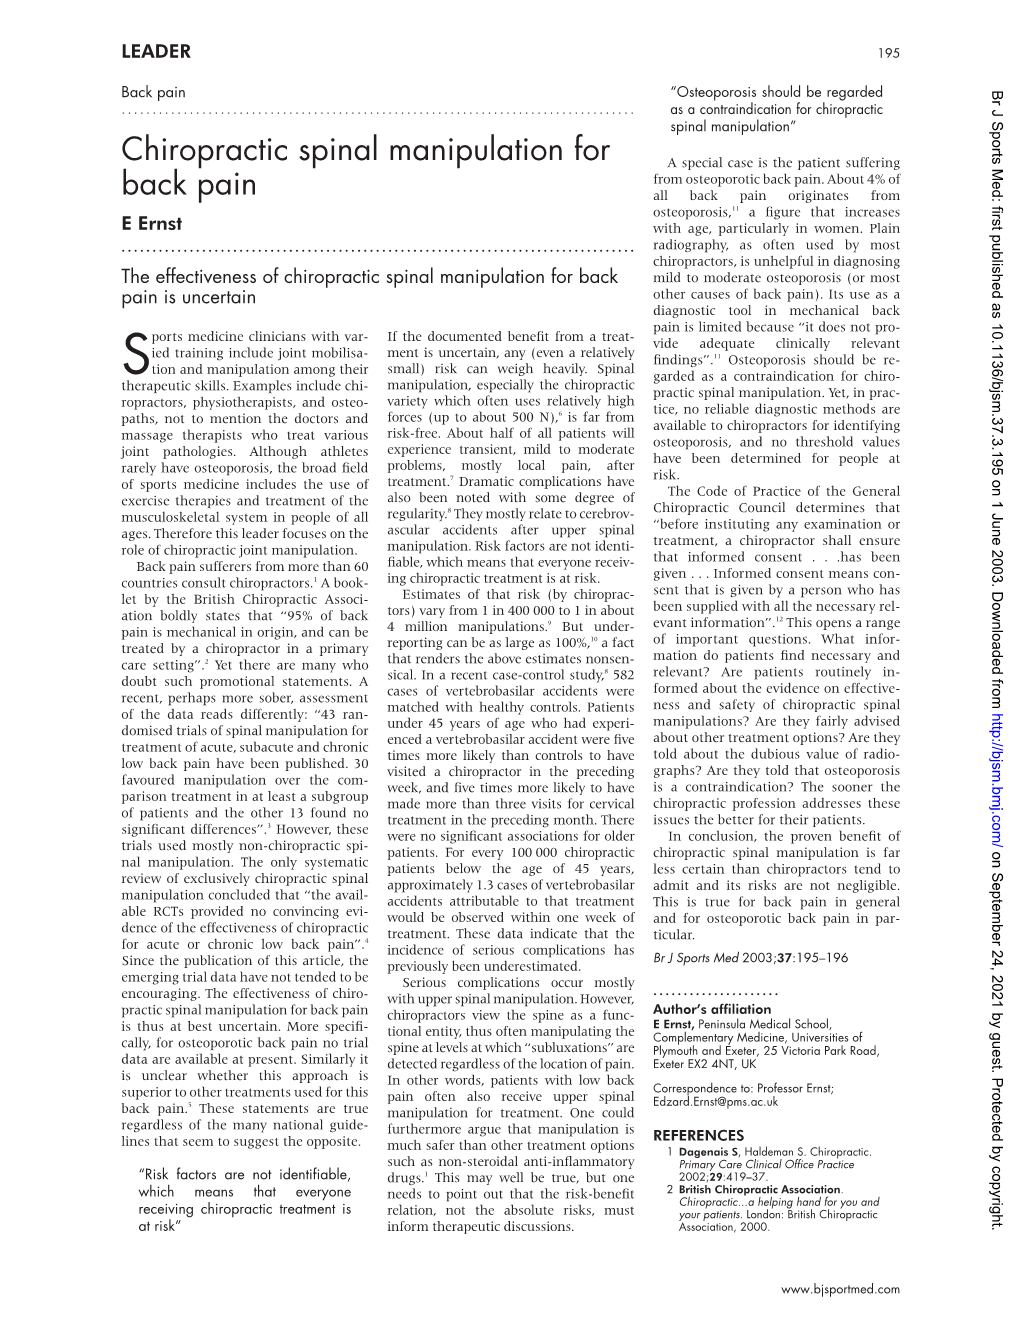 Chiropractic Spinal Manipulation for Back Pain